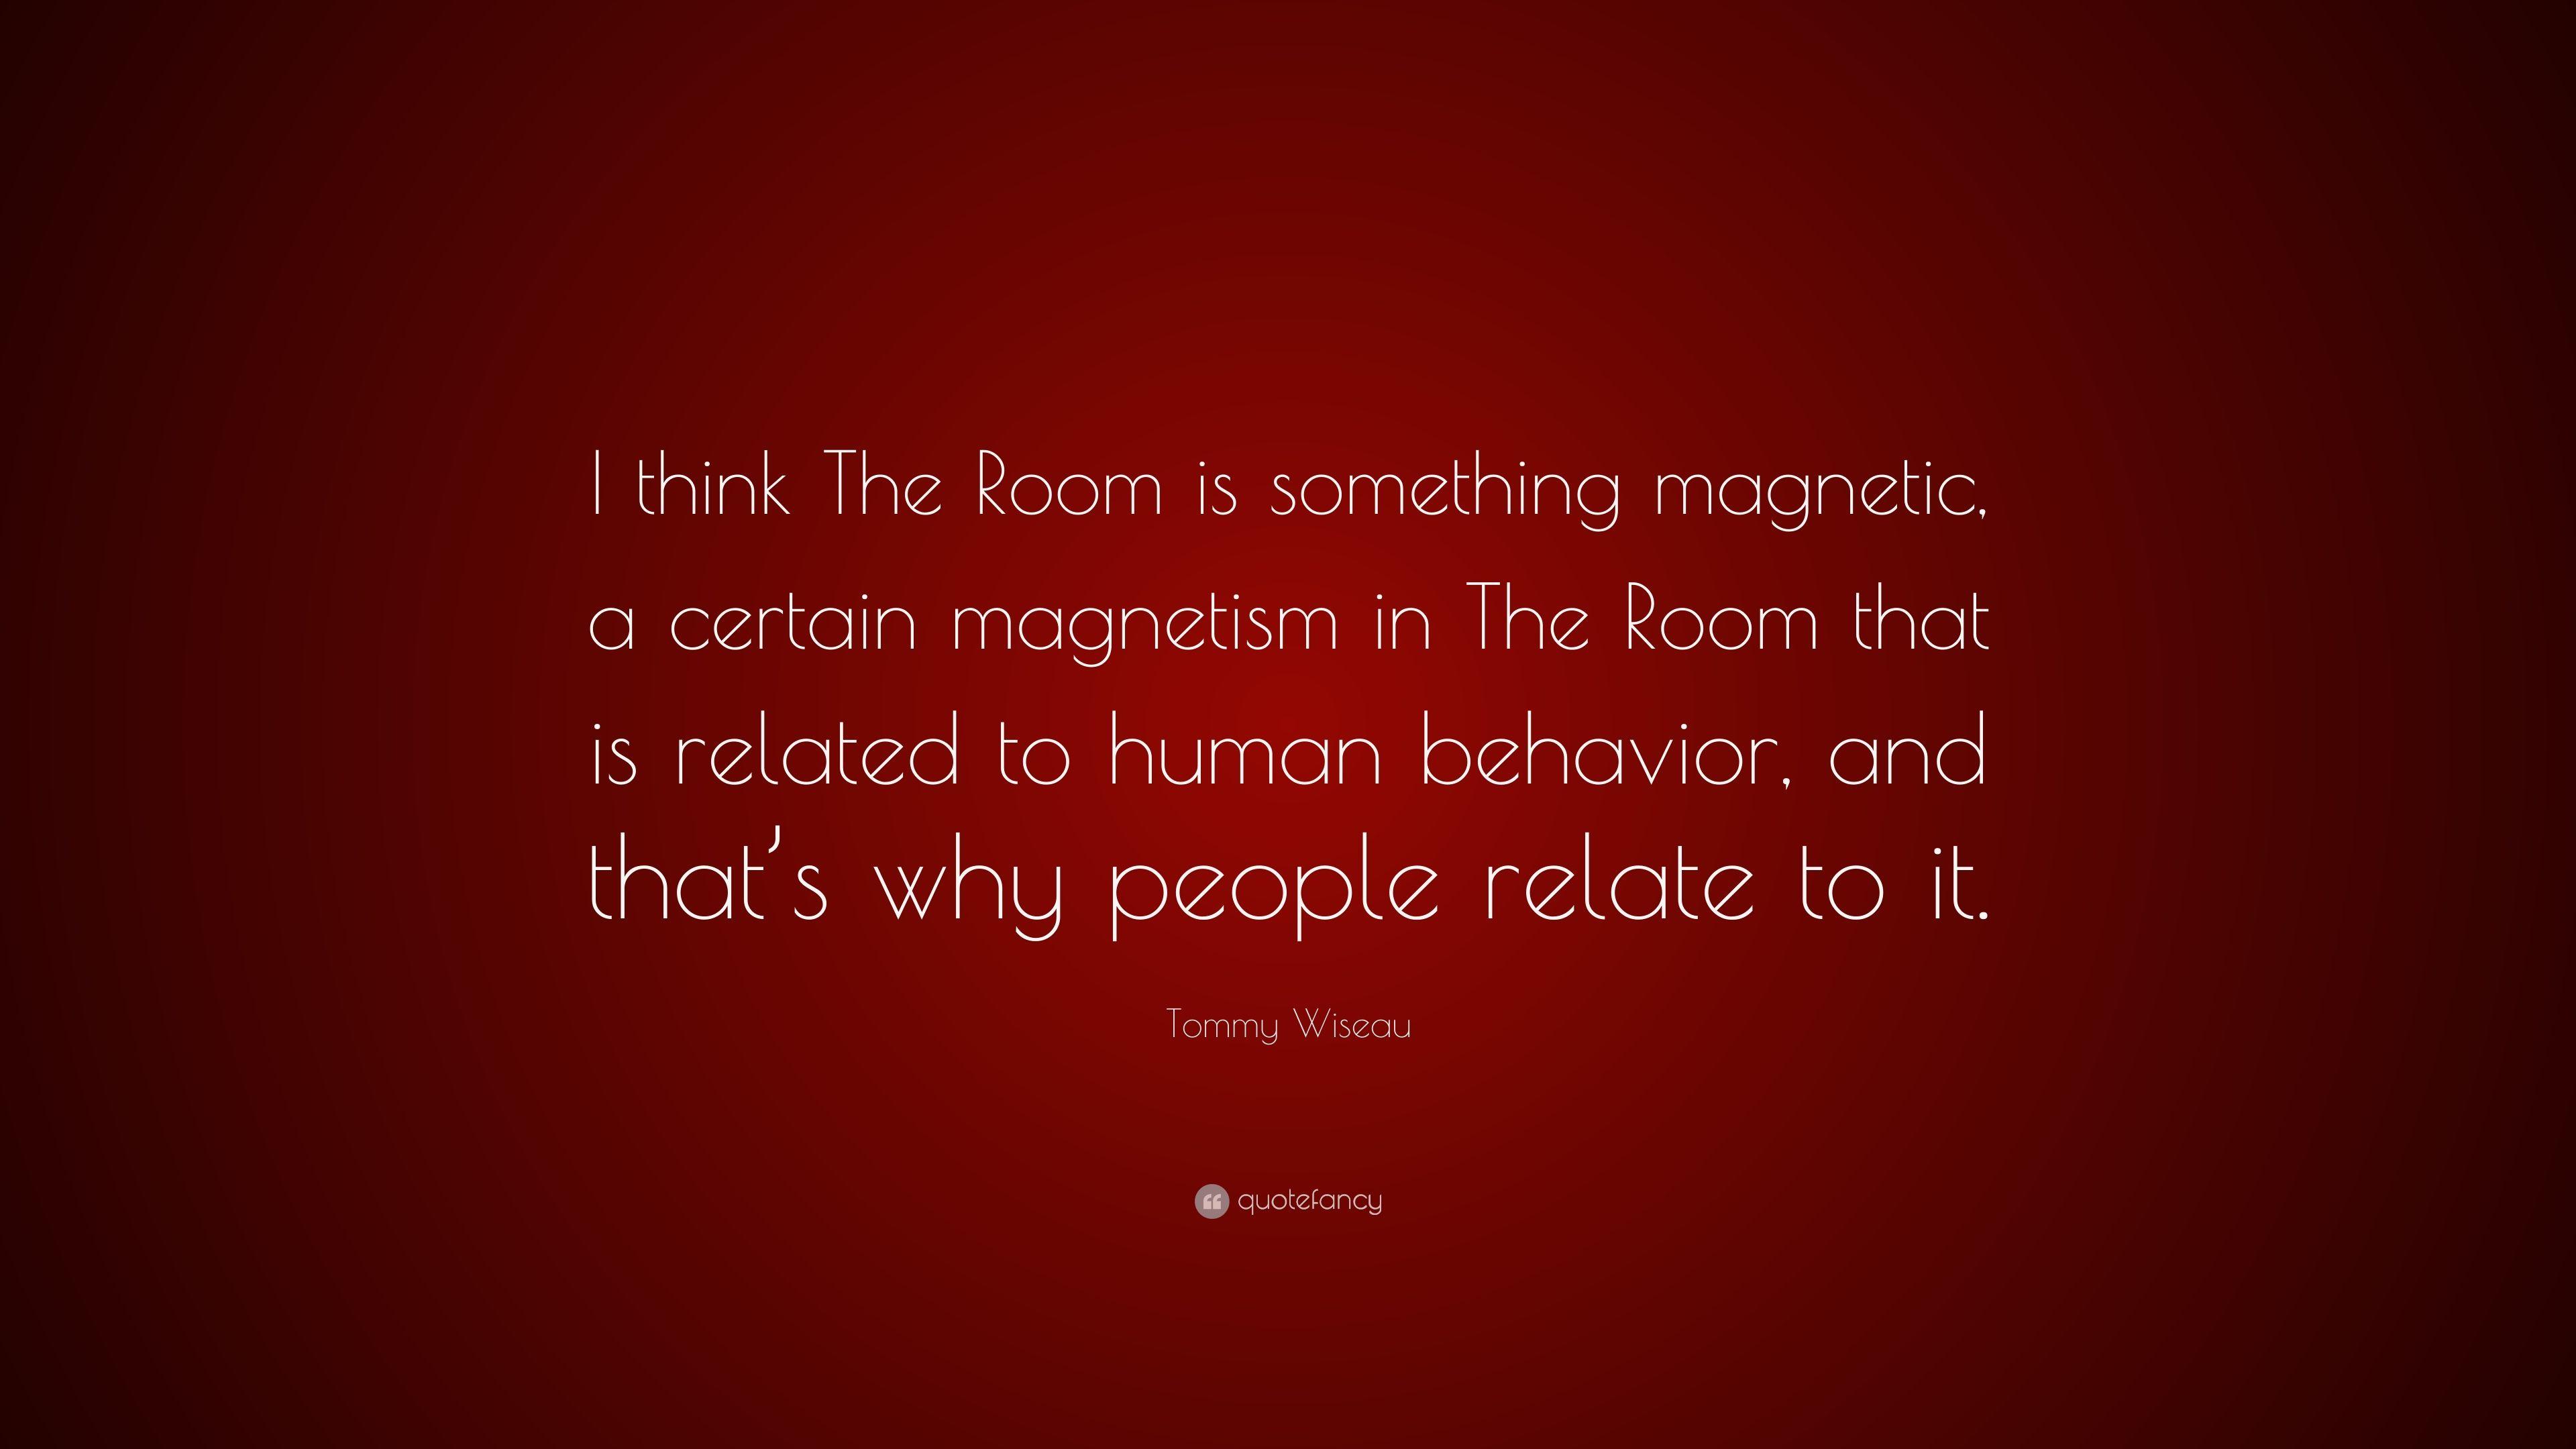 Tommy Wiseau Quote: “I think The Room is something magnetic